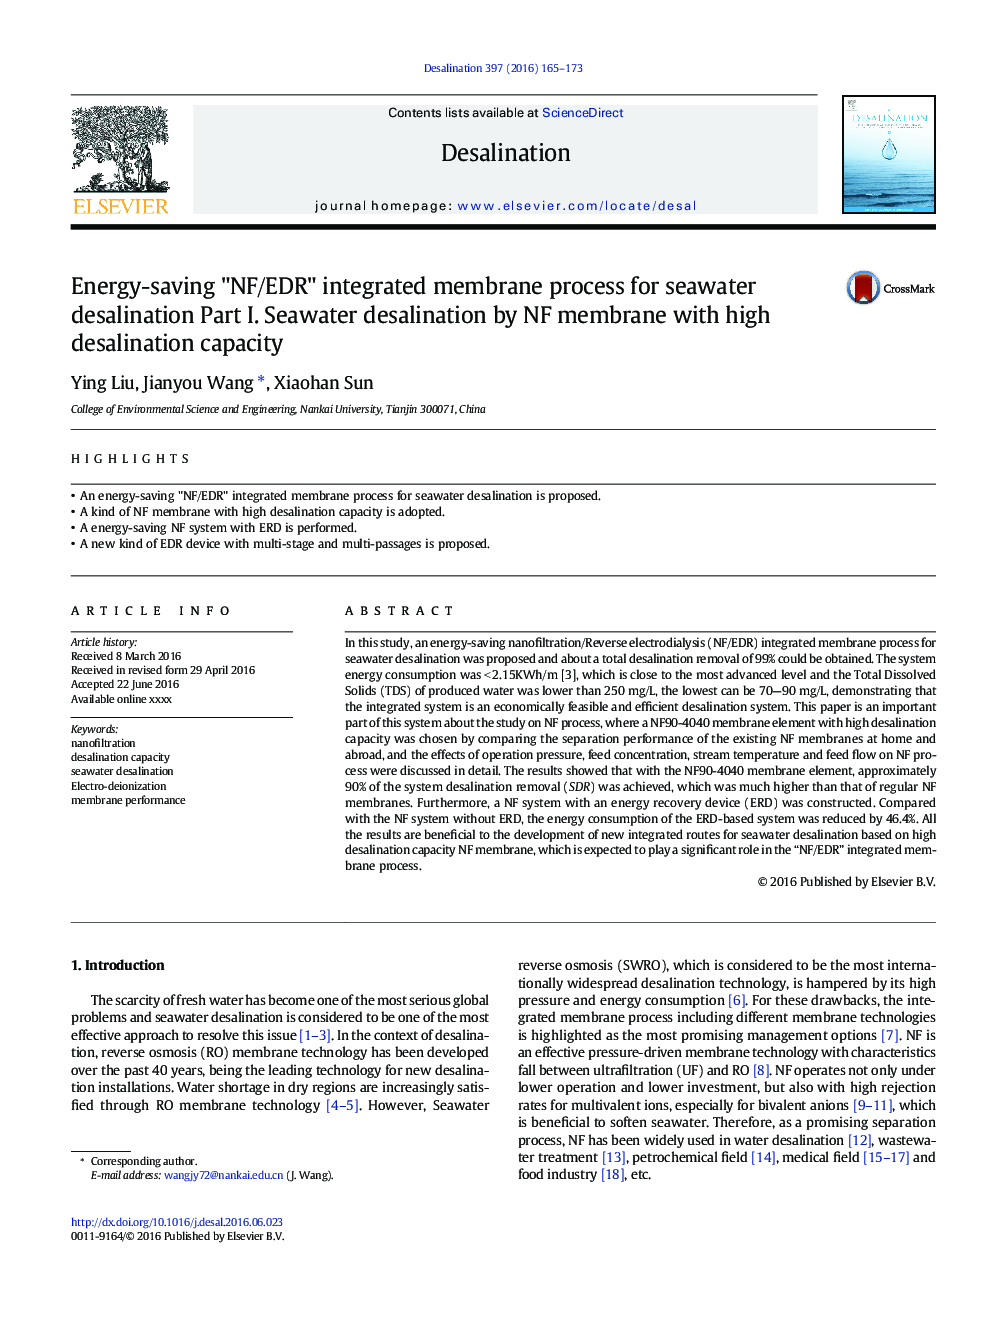 Energy-saving "NF/EDR" integrated membrane process for seawater desalination Part I. Seawater desalination by NF membrane with high desalination capacity